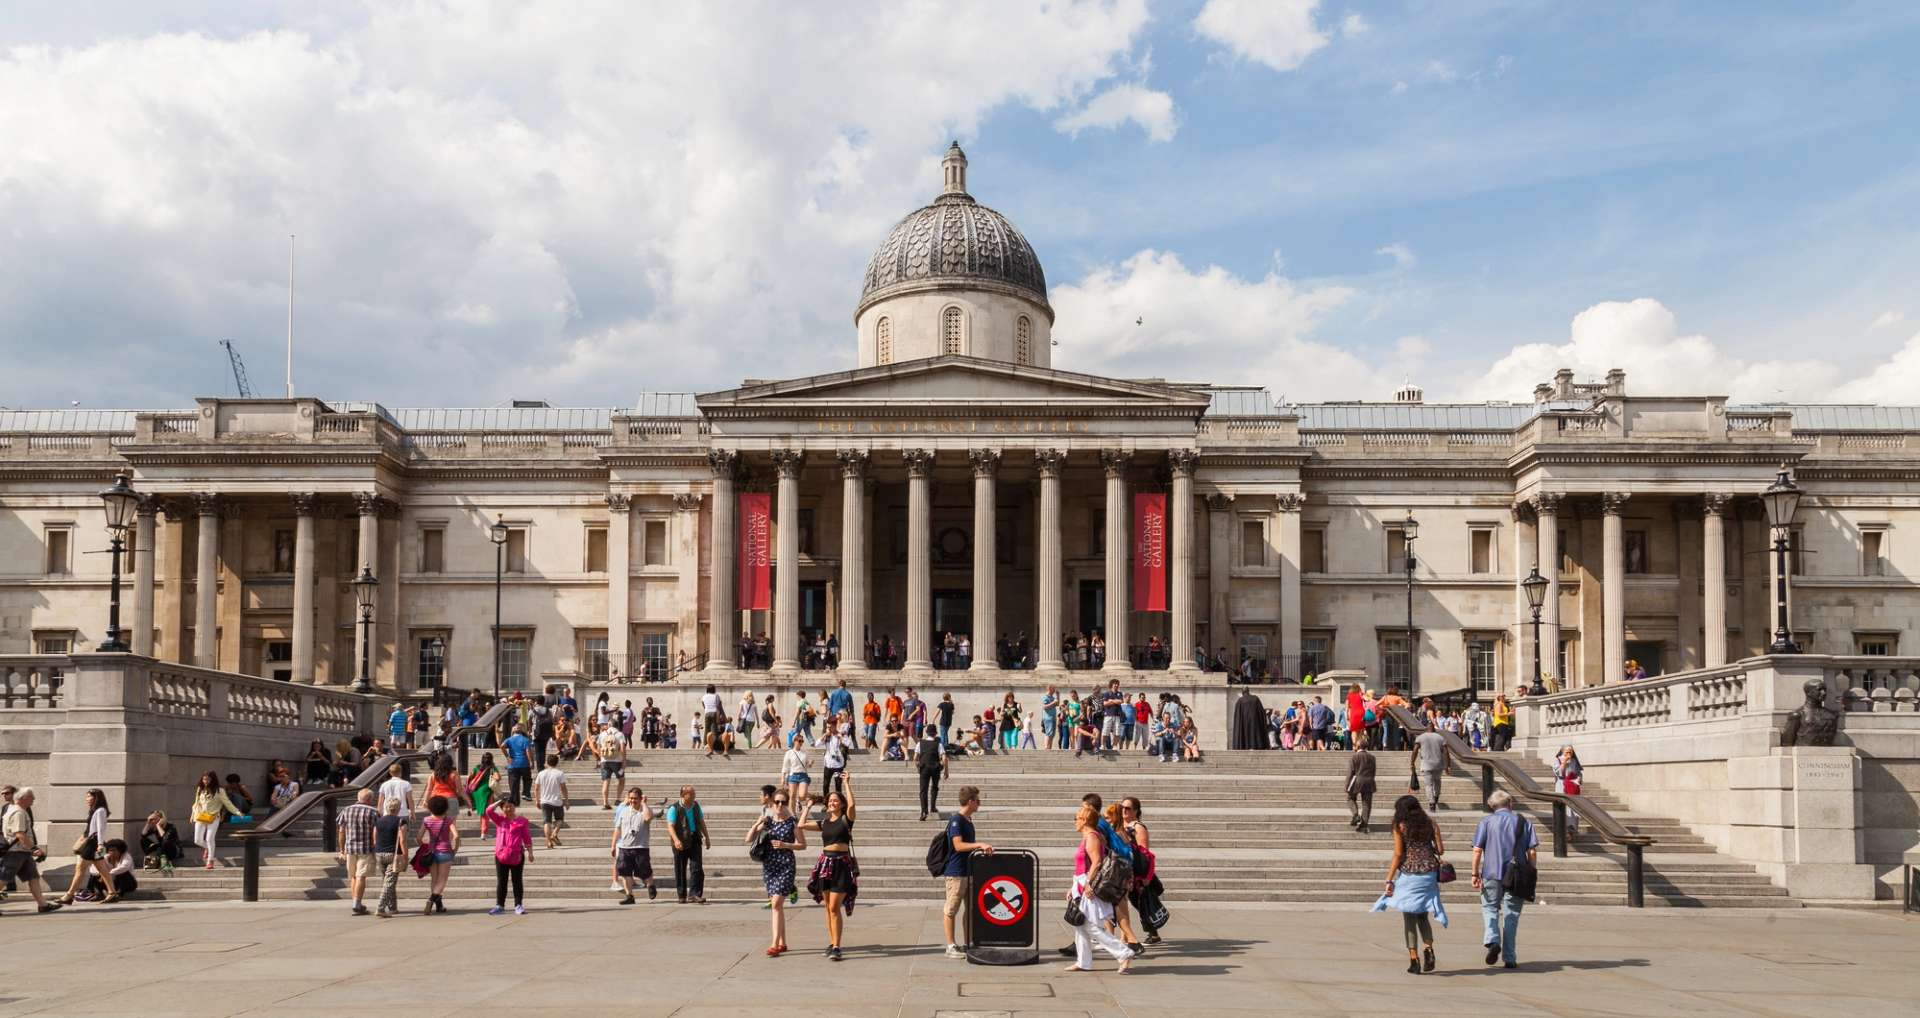 An image of the National Gallery, London from the outside. It shows the iconic building, seen from Trafalgar Square on a bright and sunny day. Many people stand on the steps.